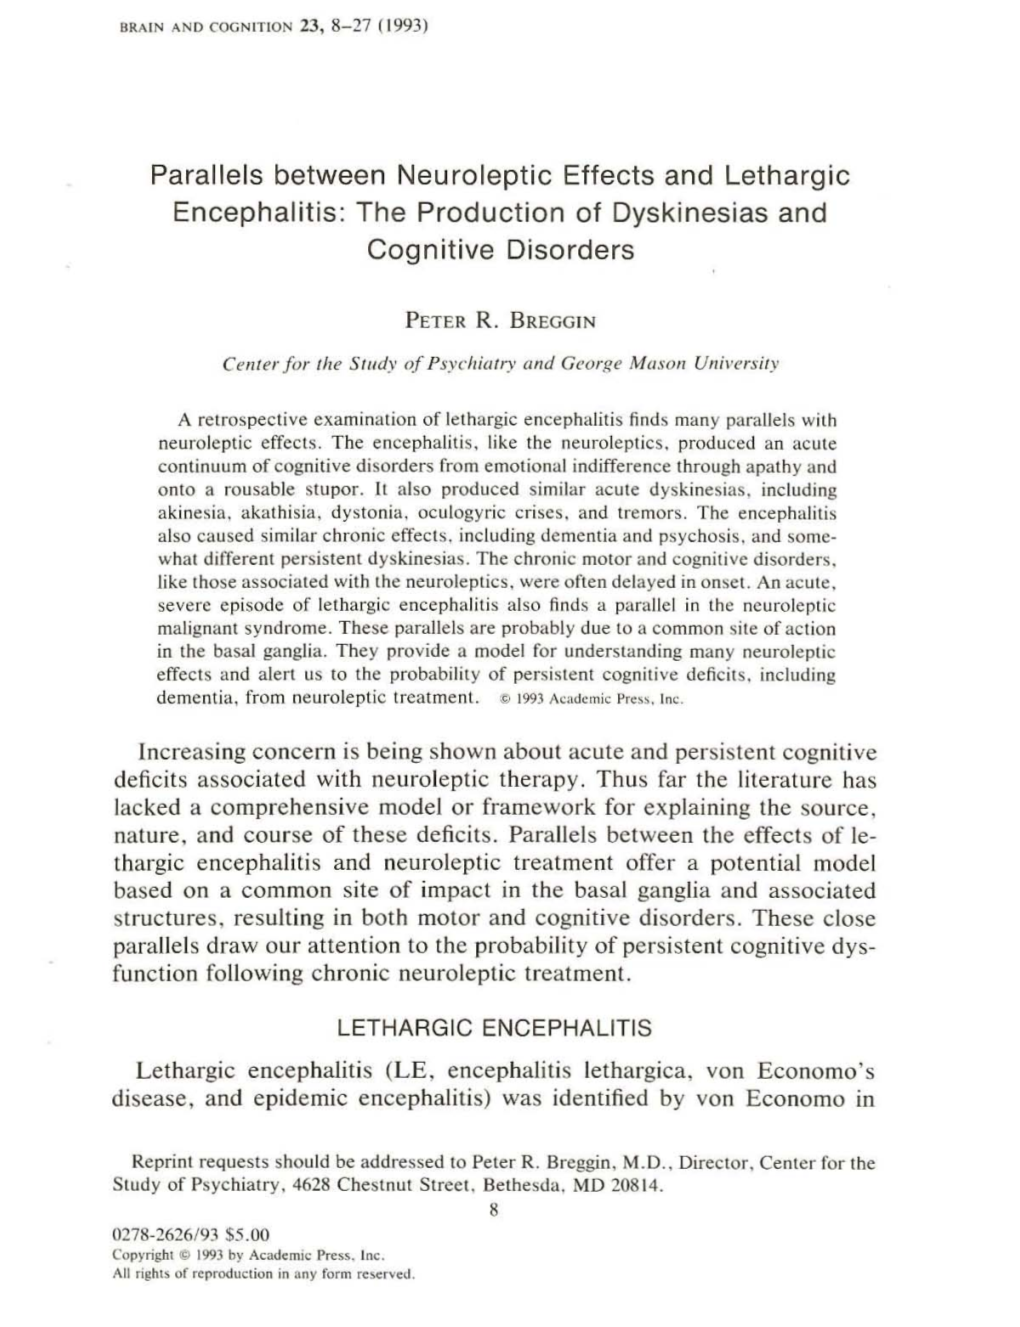 Parallels Between Neuroleptic Effects and Lethargic Encephalitis: the Production of Dyskinesias and Cognitive Disorders